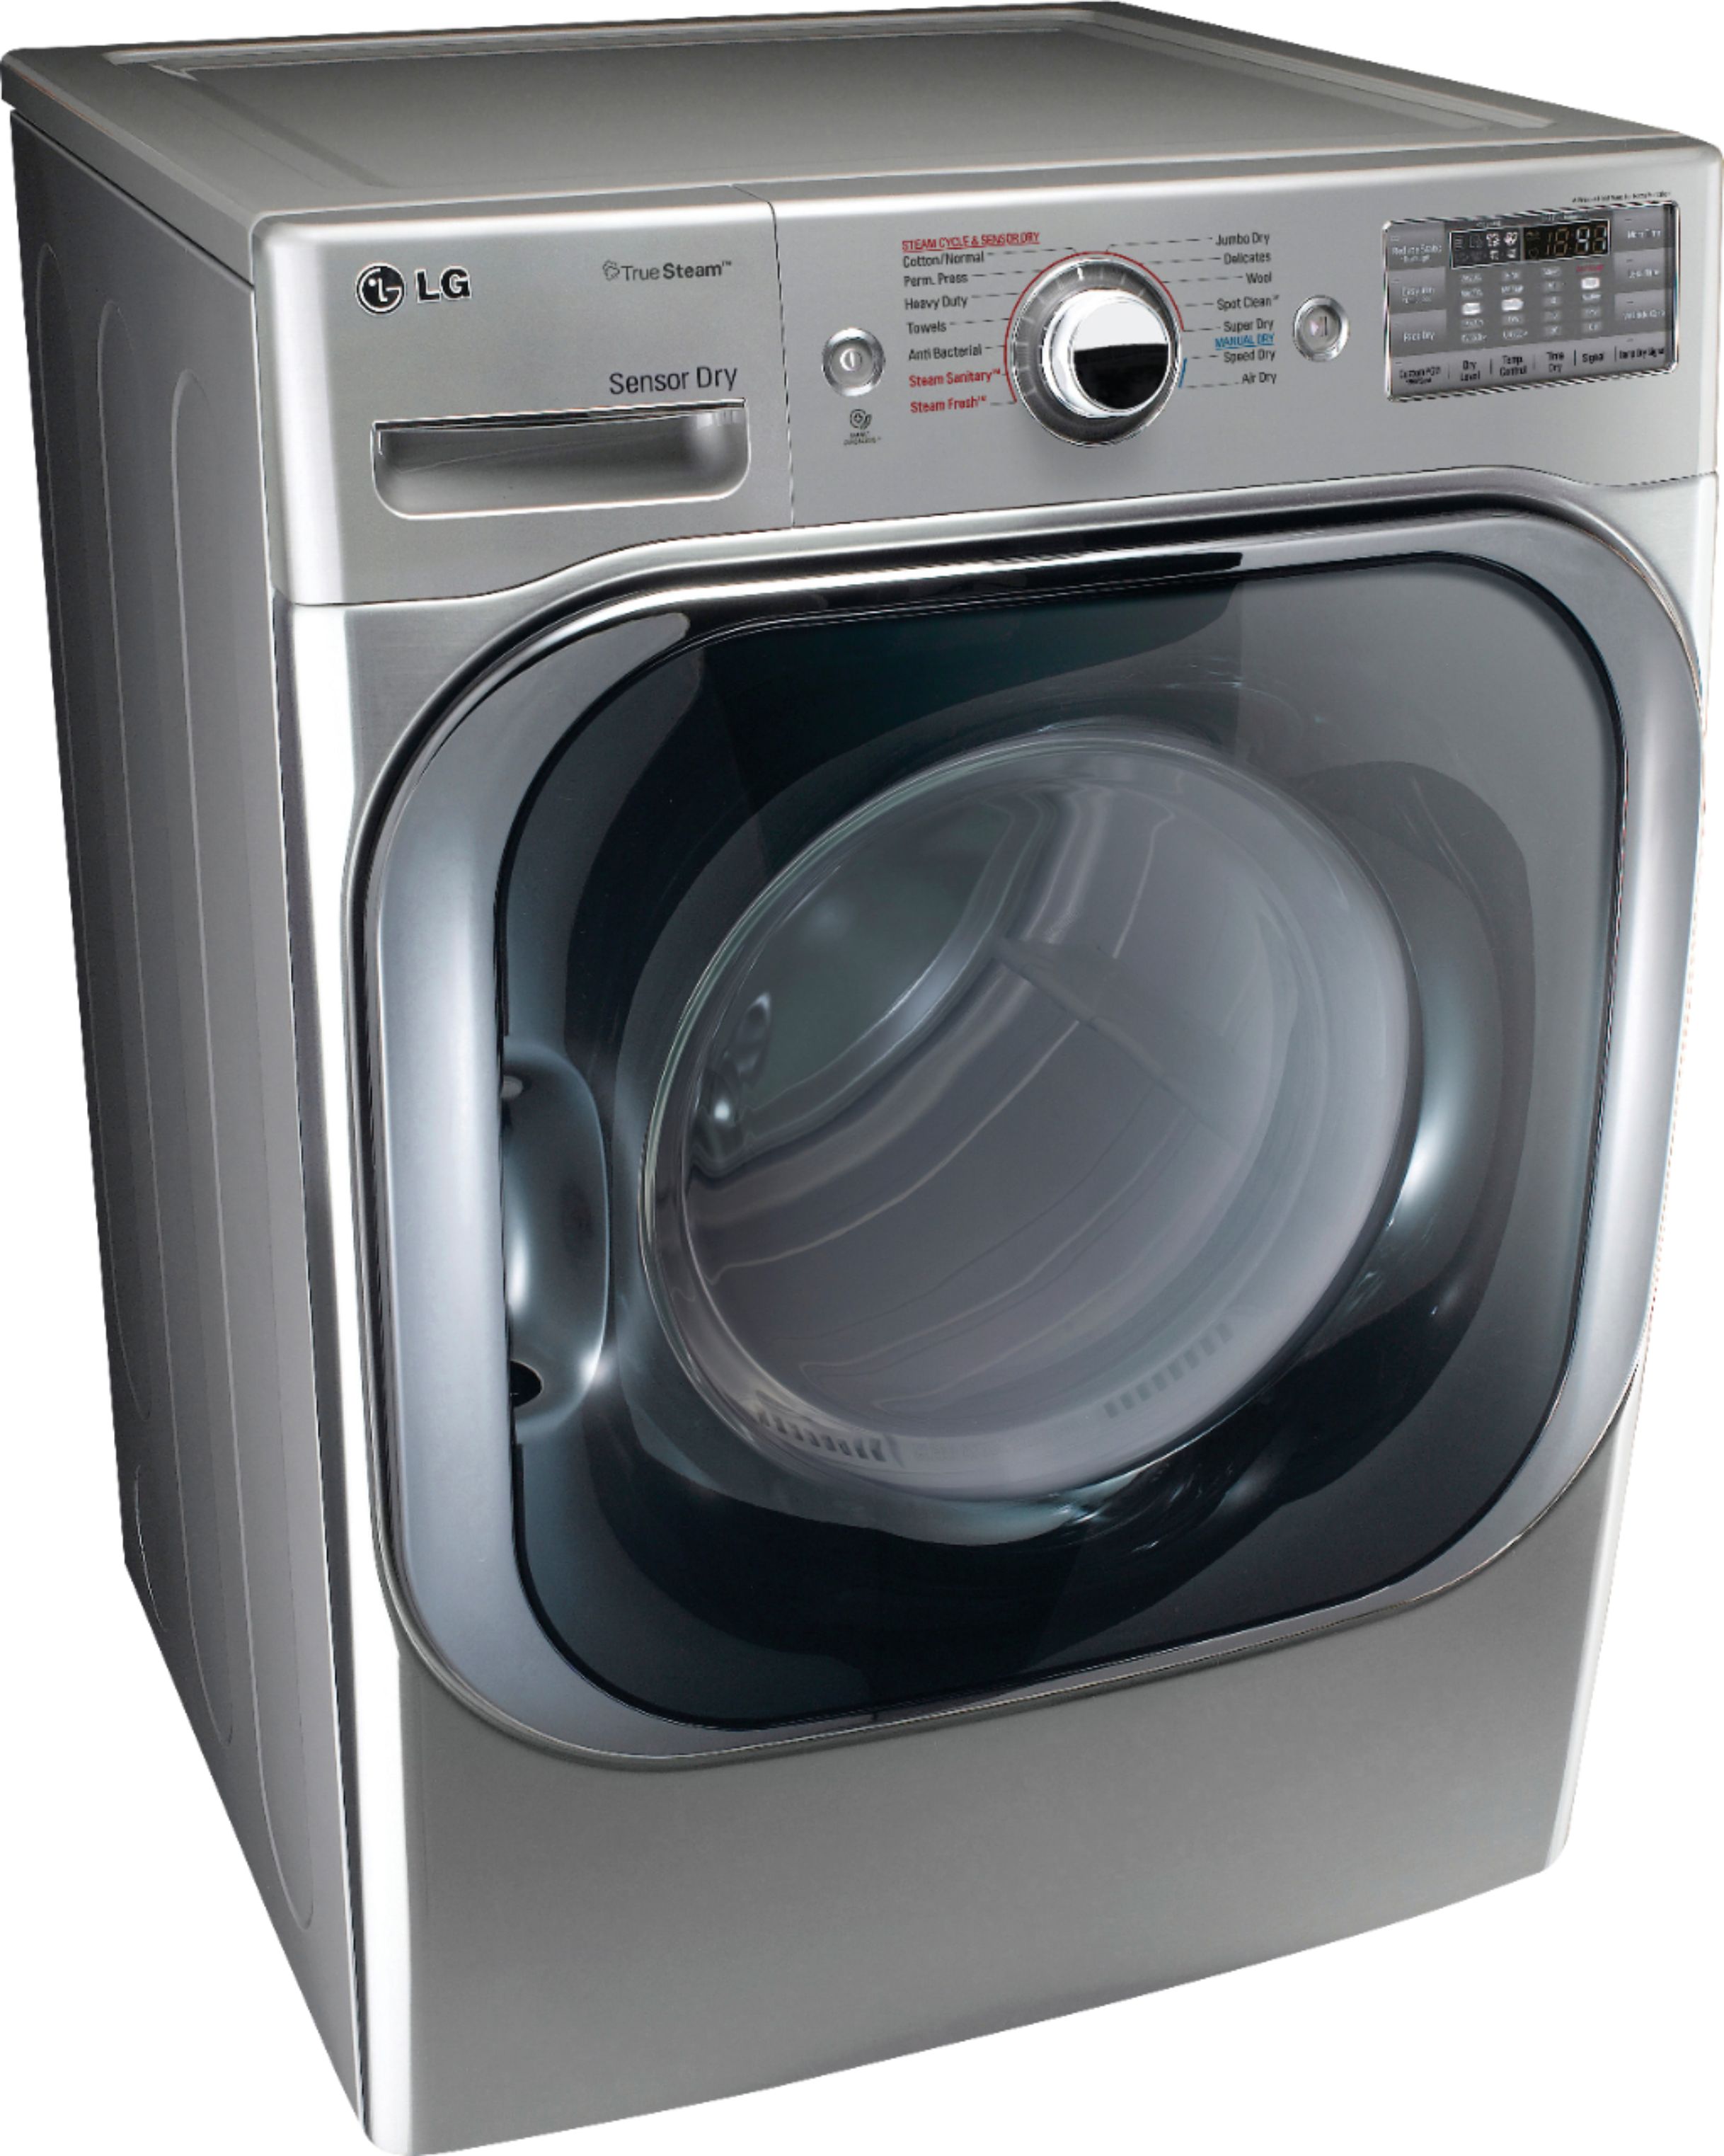 Angle View: LG - 9.0 Cu. Ft. Electric Dryer with Steam and Sensor Dry - Graphite steel